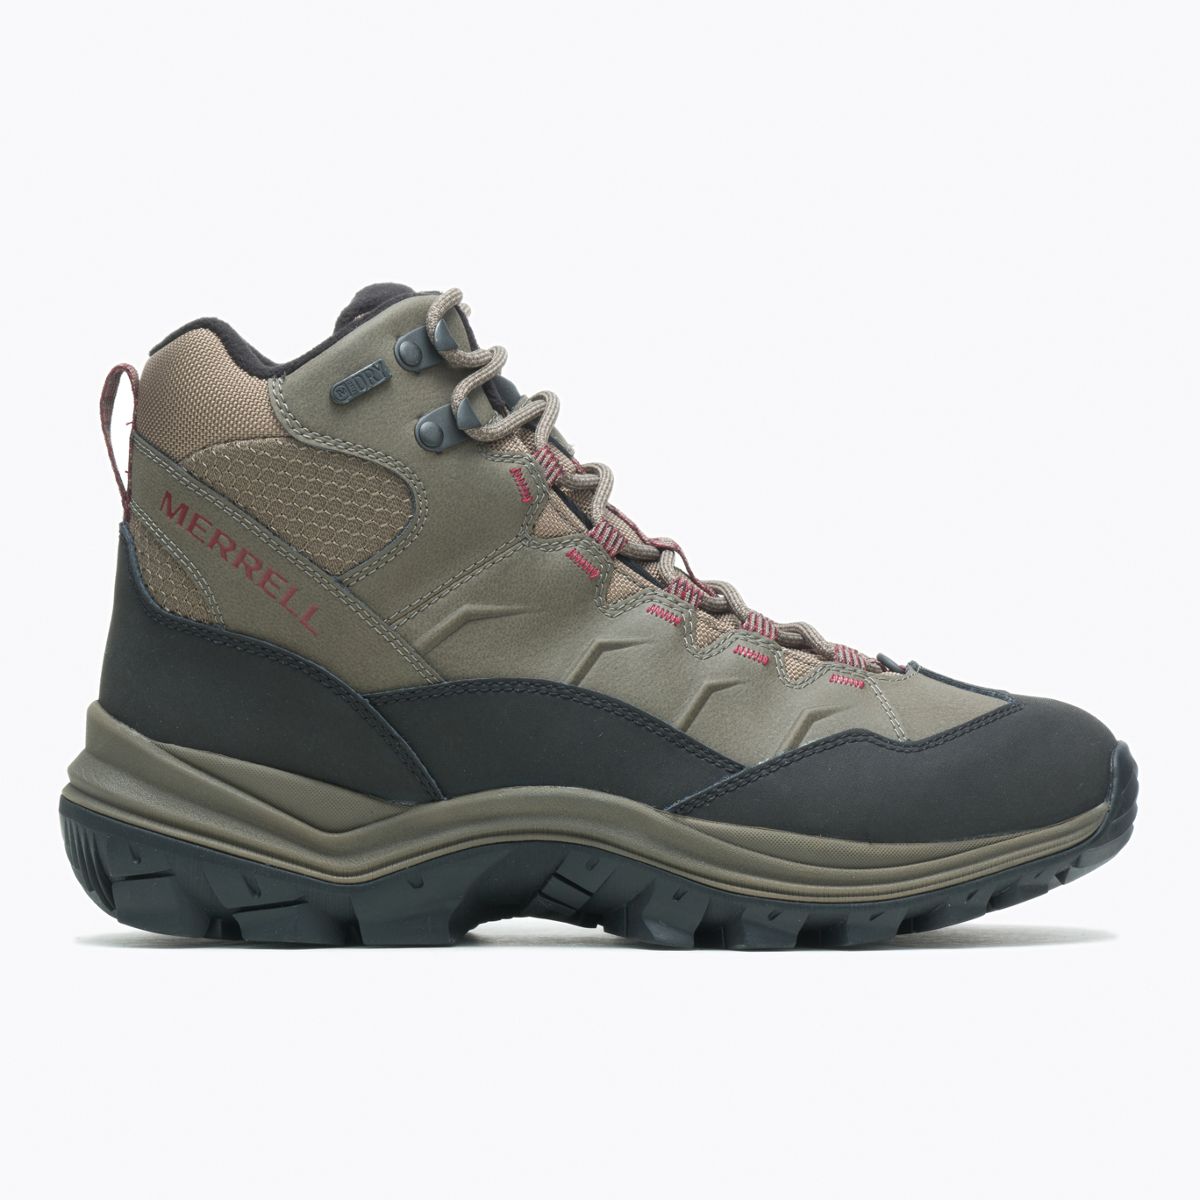 Chill Mid Waterproof Hike Boots | Merrell